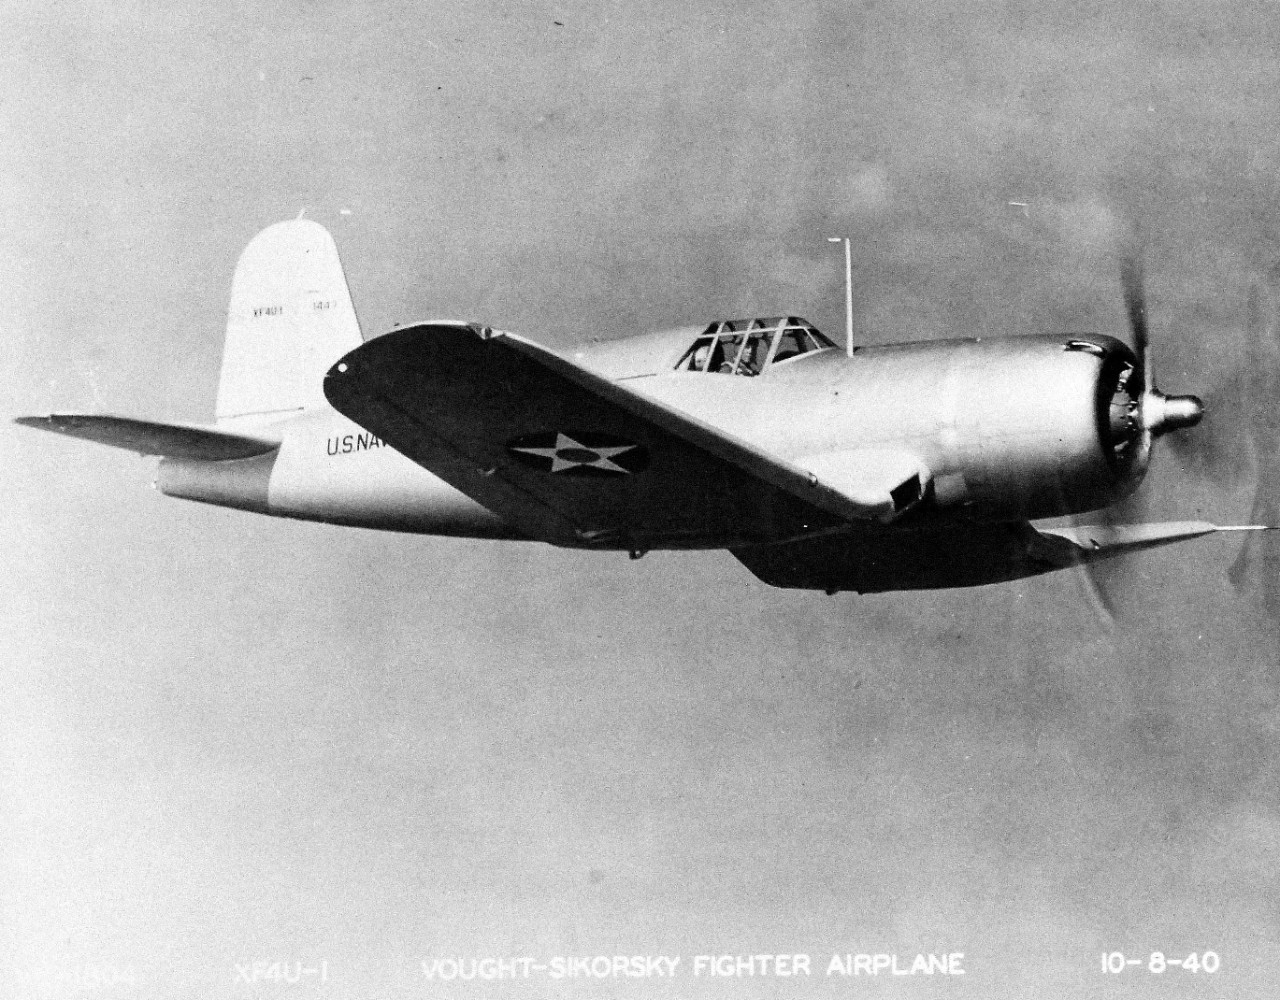 80-G-65009:   Vought XF4U-1 aircraft, October 1940.   This aircraft was the prototype for the Corsair.  Photographed on October 8, 1940.   Official U.S. Navy Photograph, now in the collections of the National Archives.  